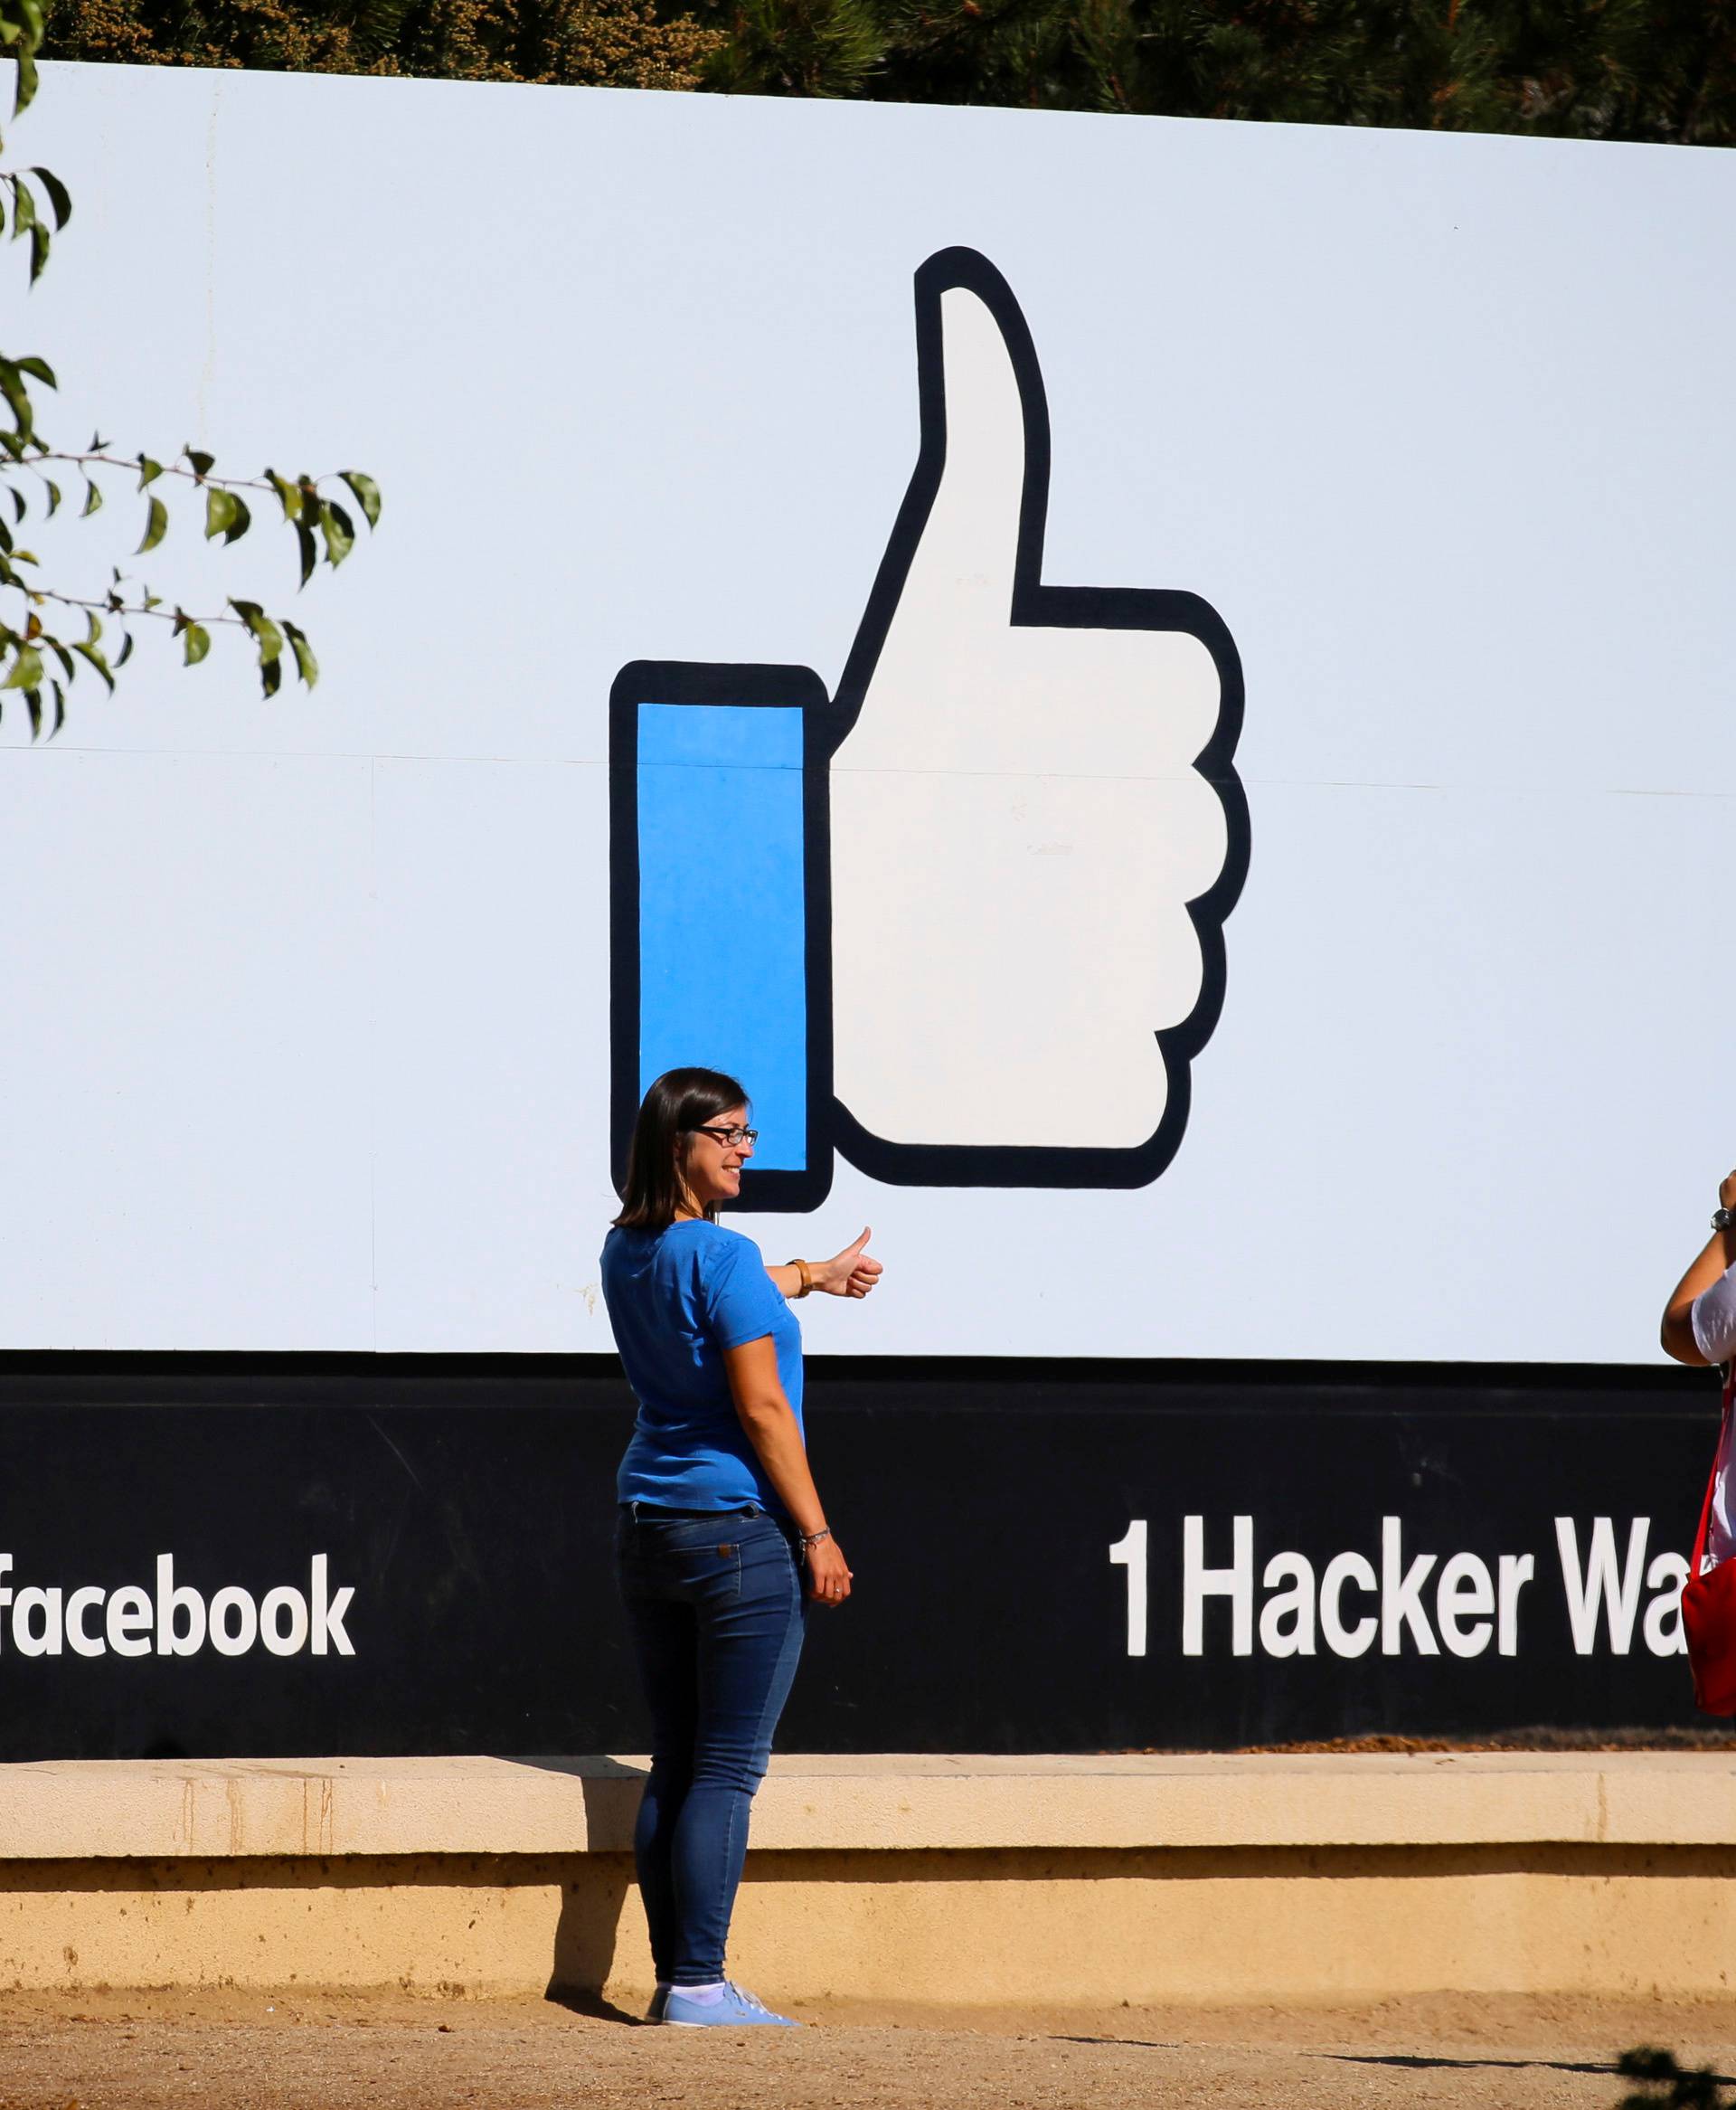 FILE PHOTO: Two women take photos in front of the entrance sign to Facebook headquarters in Menlo Park